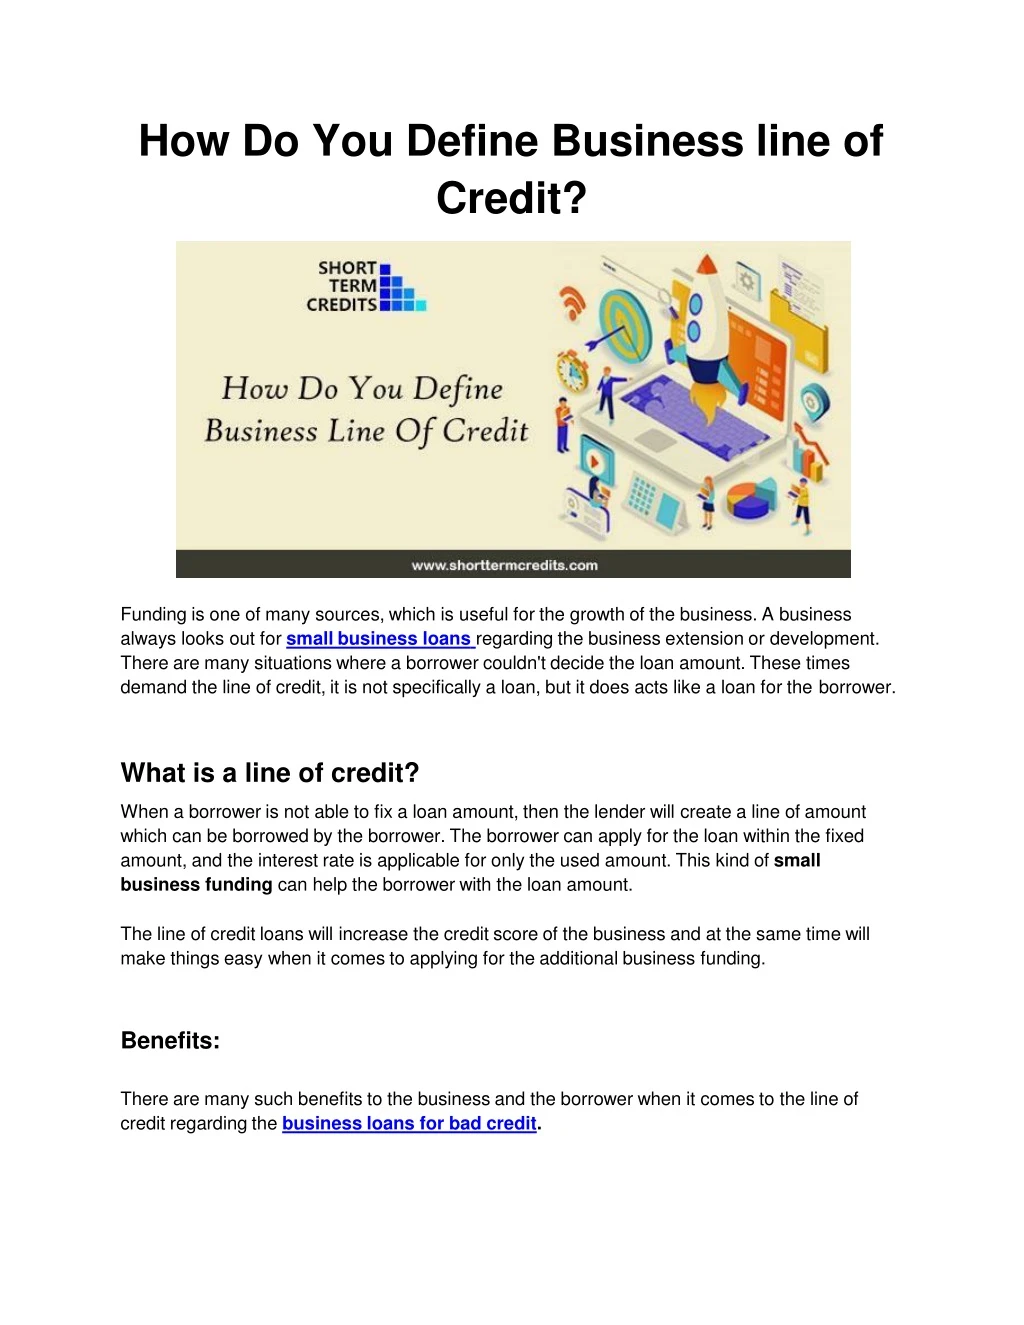 how do you define business line of credit